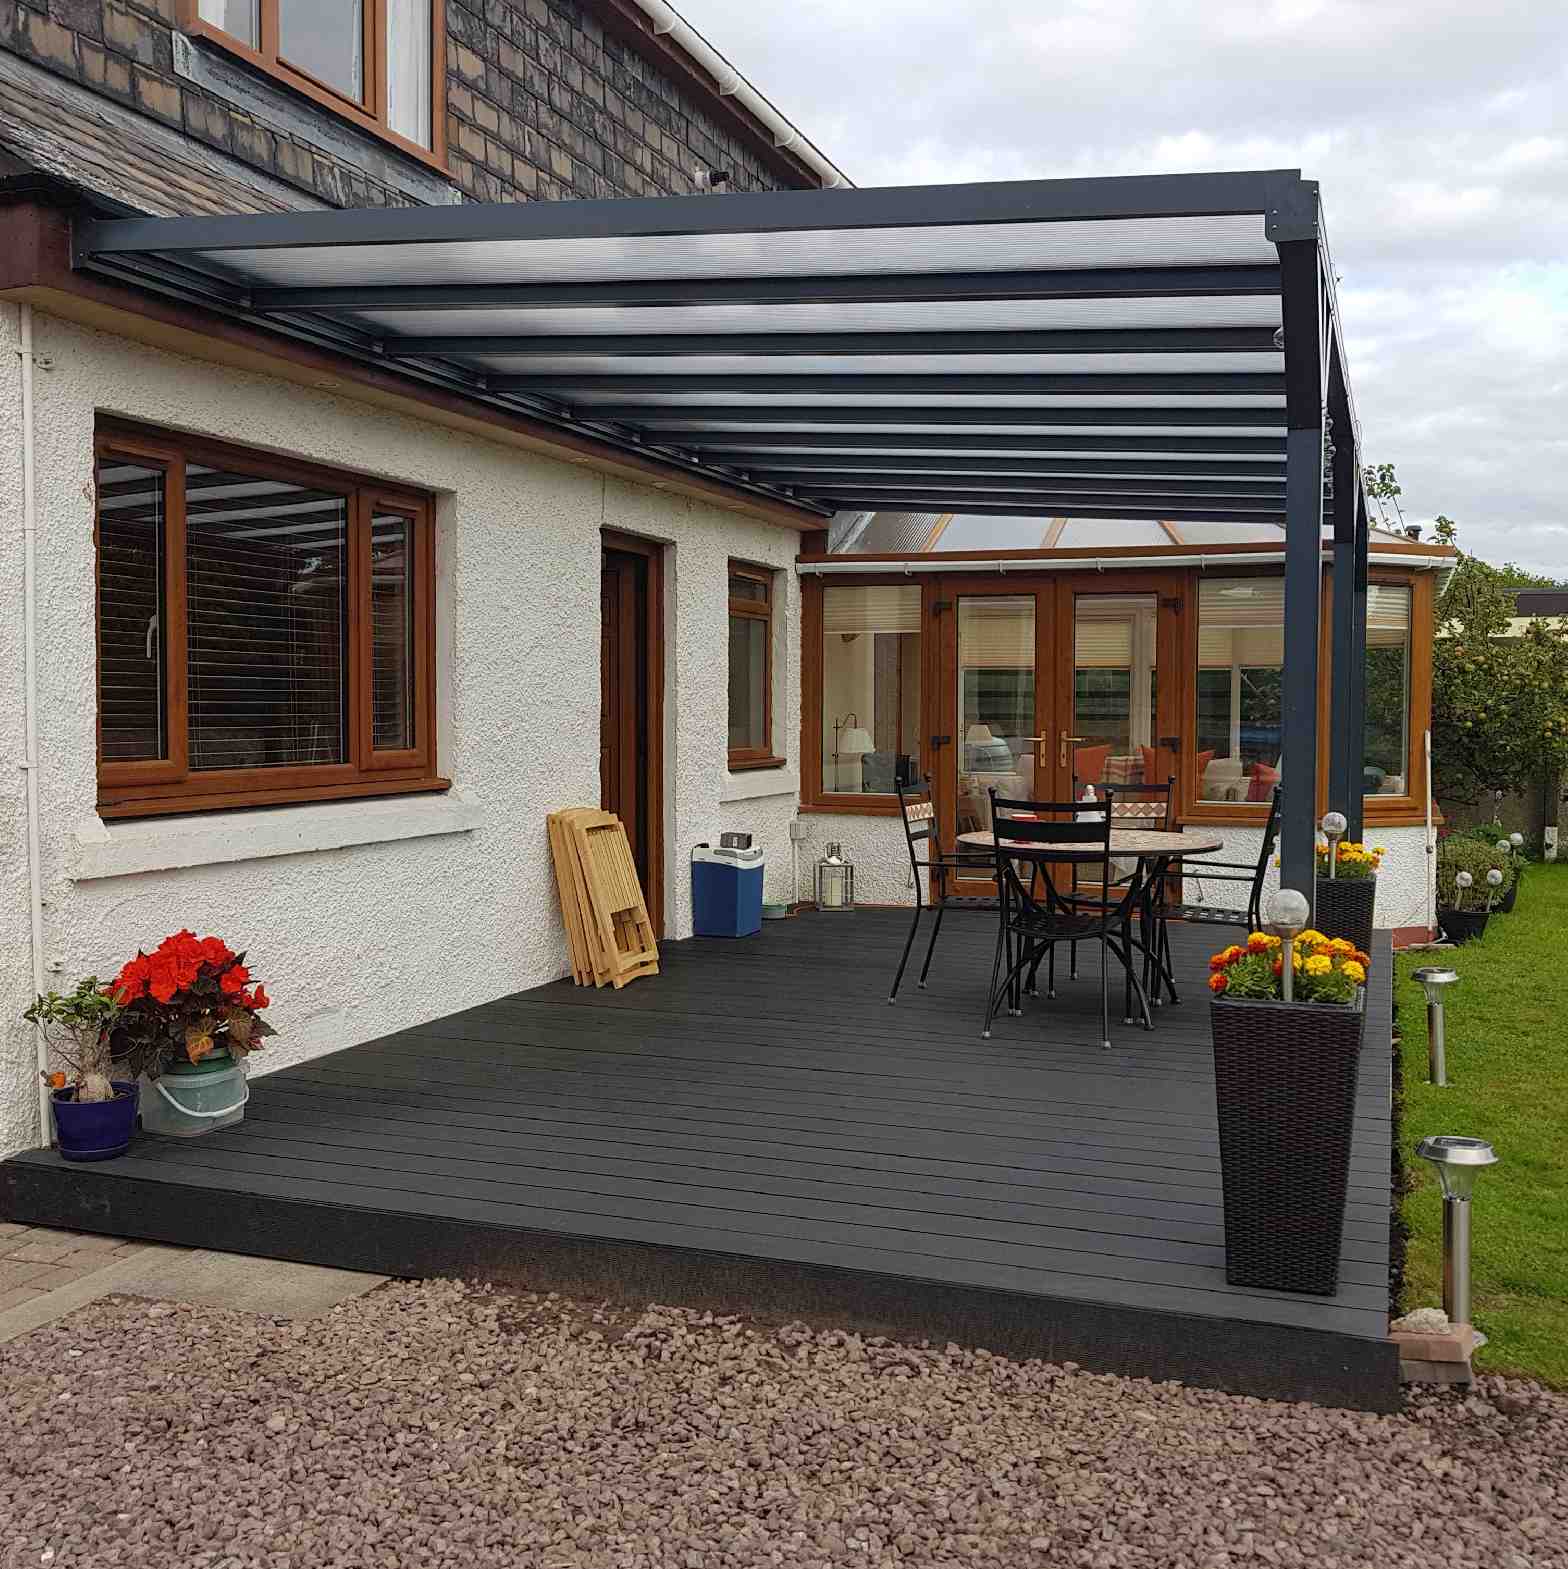 Buy Omega Verandah, Anthracite Grey, 16mm Polycarbonate Glazing - 3.1m (W) x 1.5m (P), (2) Supporting Posts online today